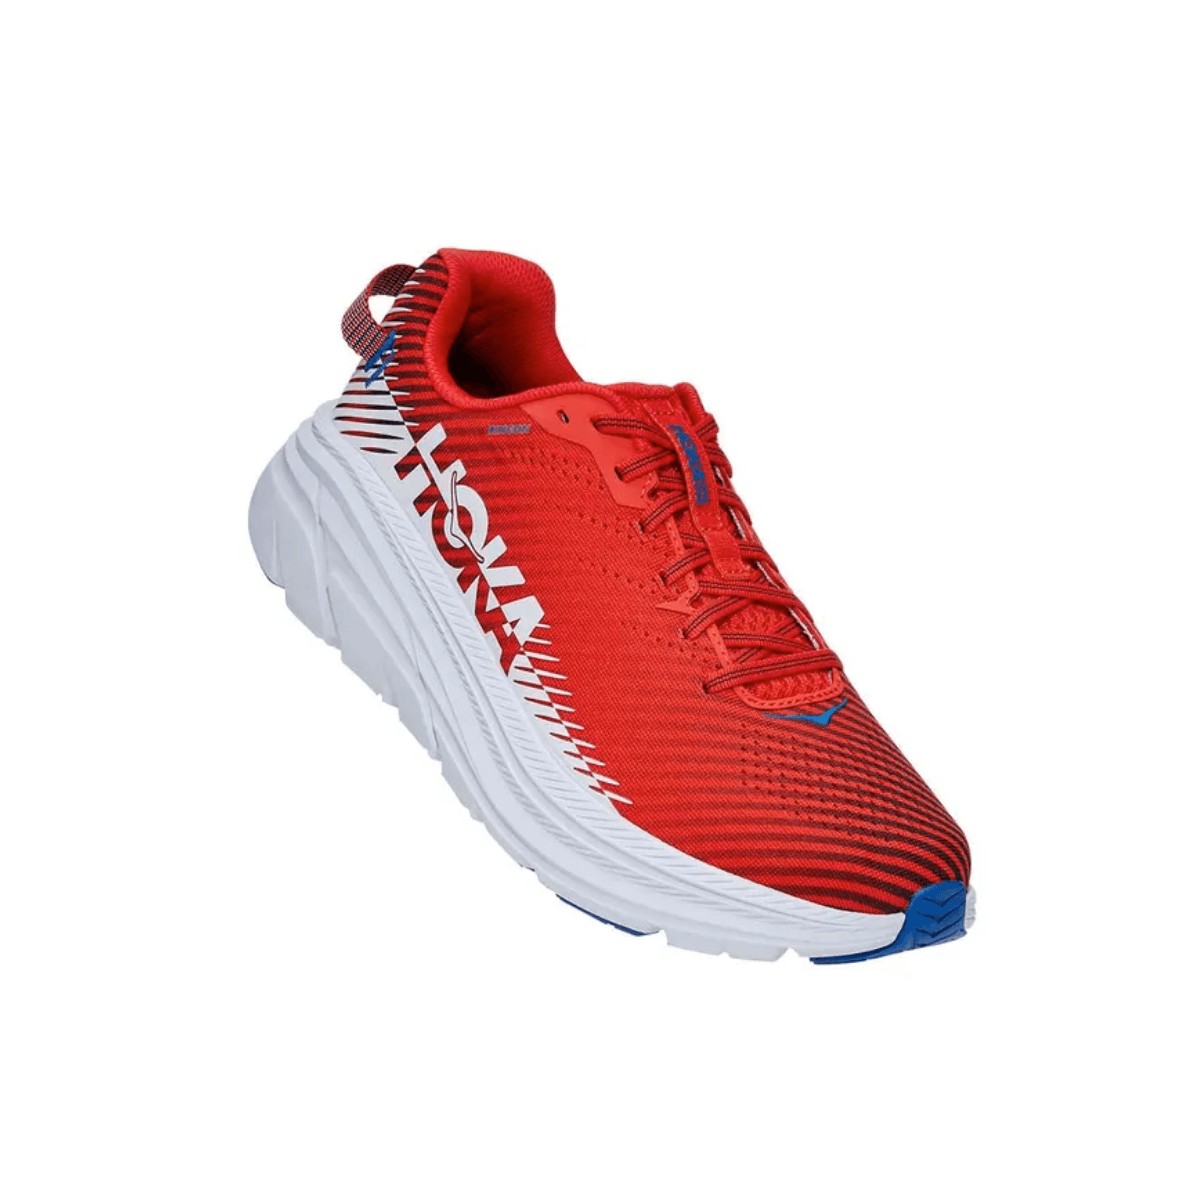 Hoka One One Elevon 2 White Orange Red Running Shoes Sneakers Men's Size US 12  for Sale in Goodlettsvlle, TN - OfferUp